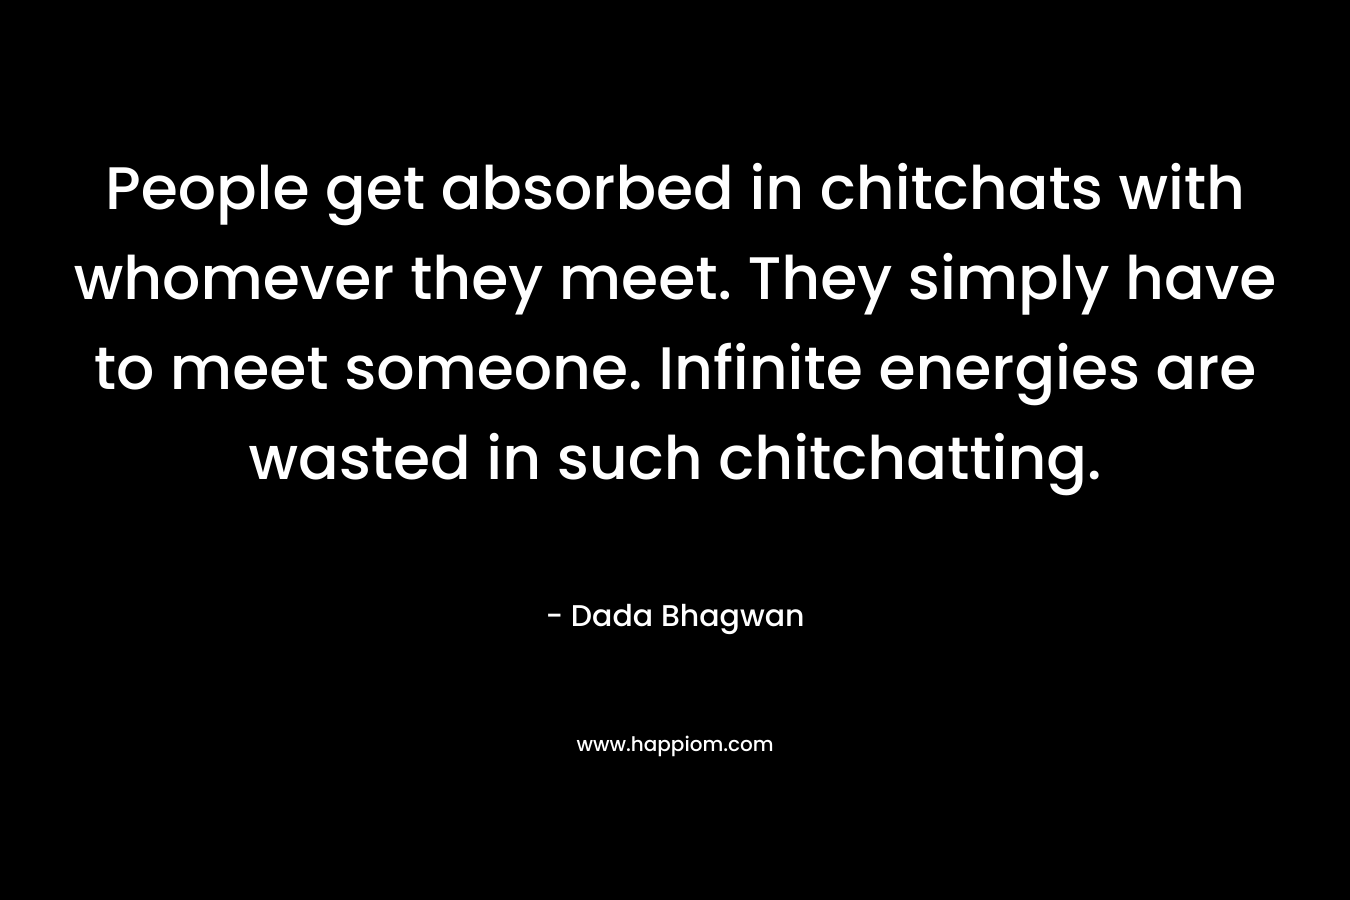 People get absorbed in chitchats with whomever they meet. They simply have to meet someone. Infinite energies are wasted in such chitchatting. – Dada Bhagwan